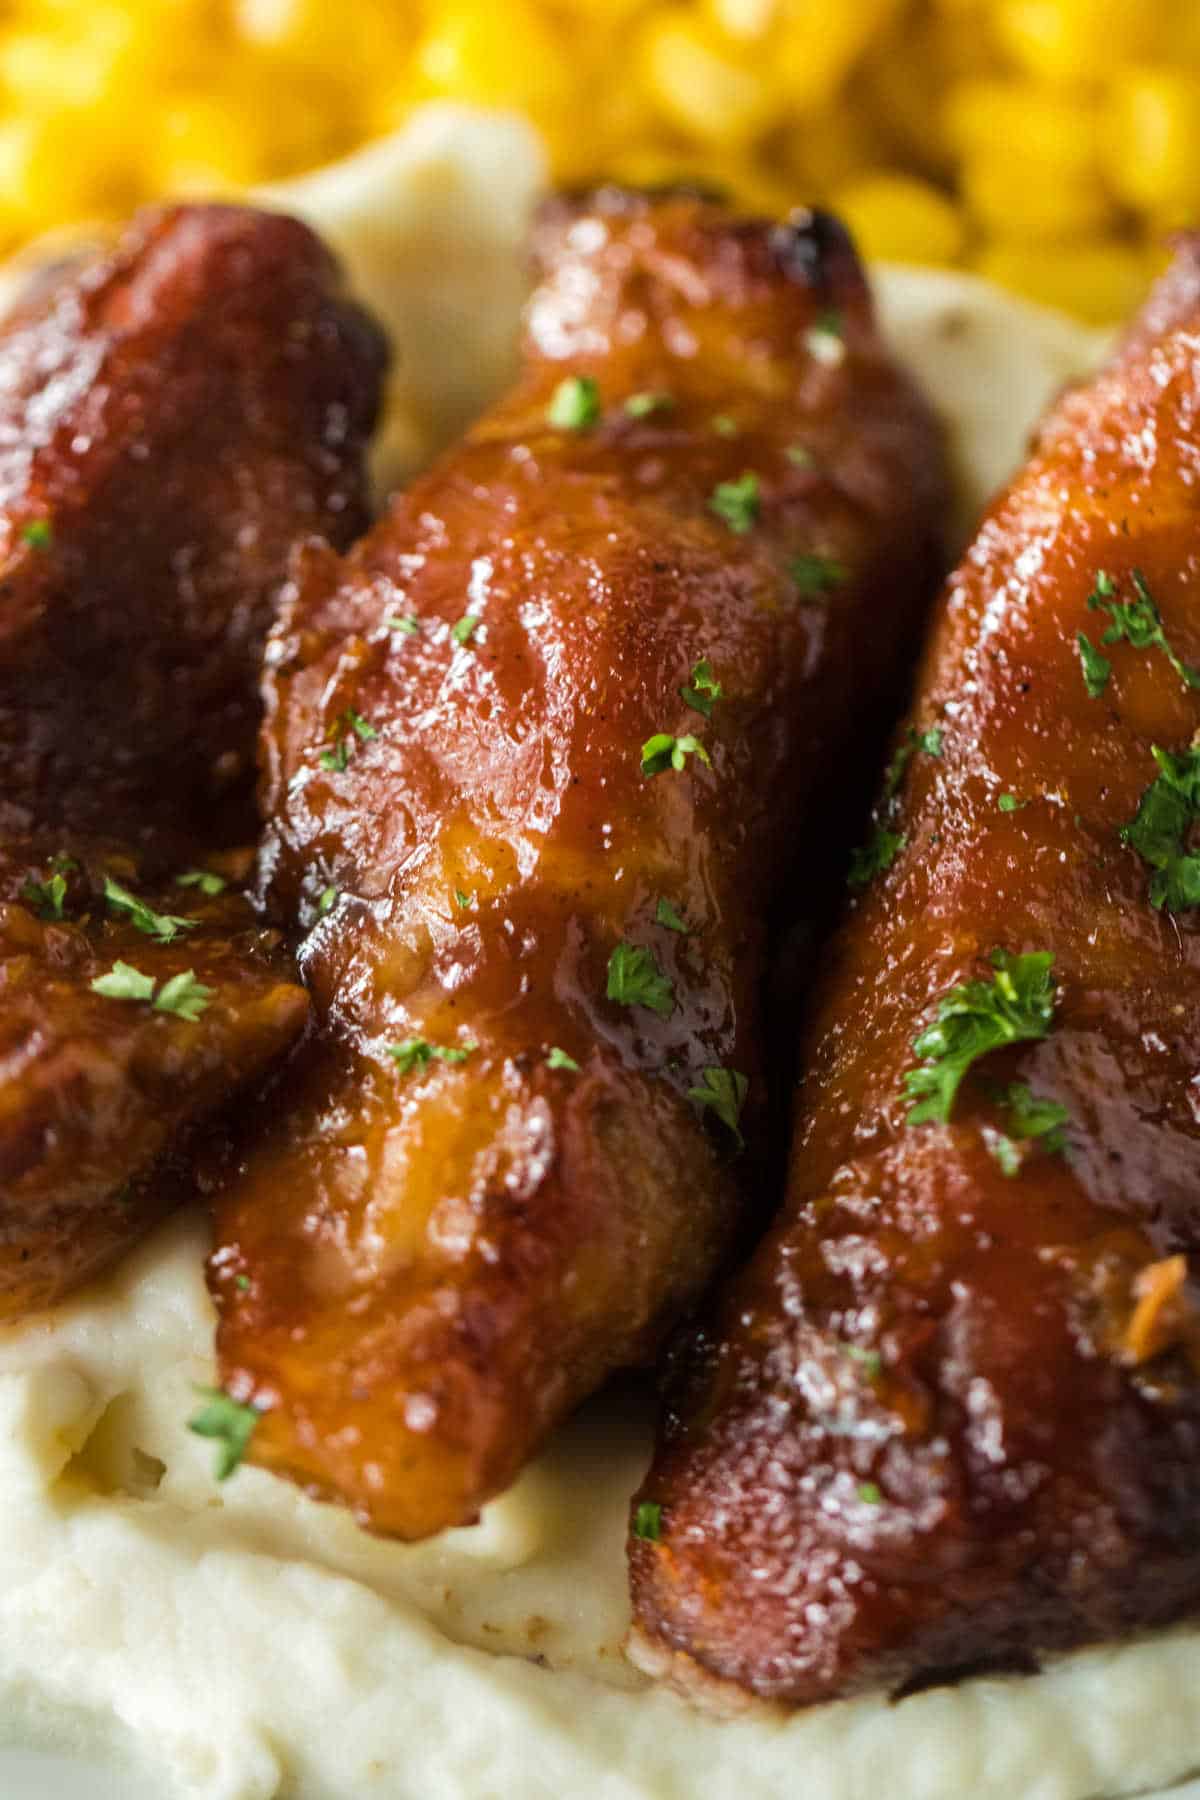 Country-style ribs on mashed potatoes.